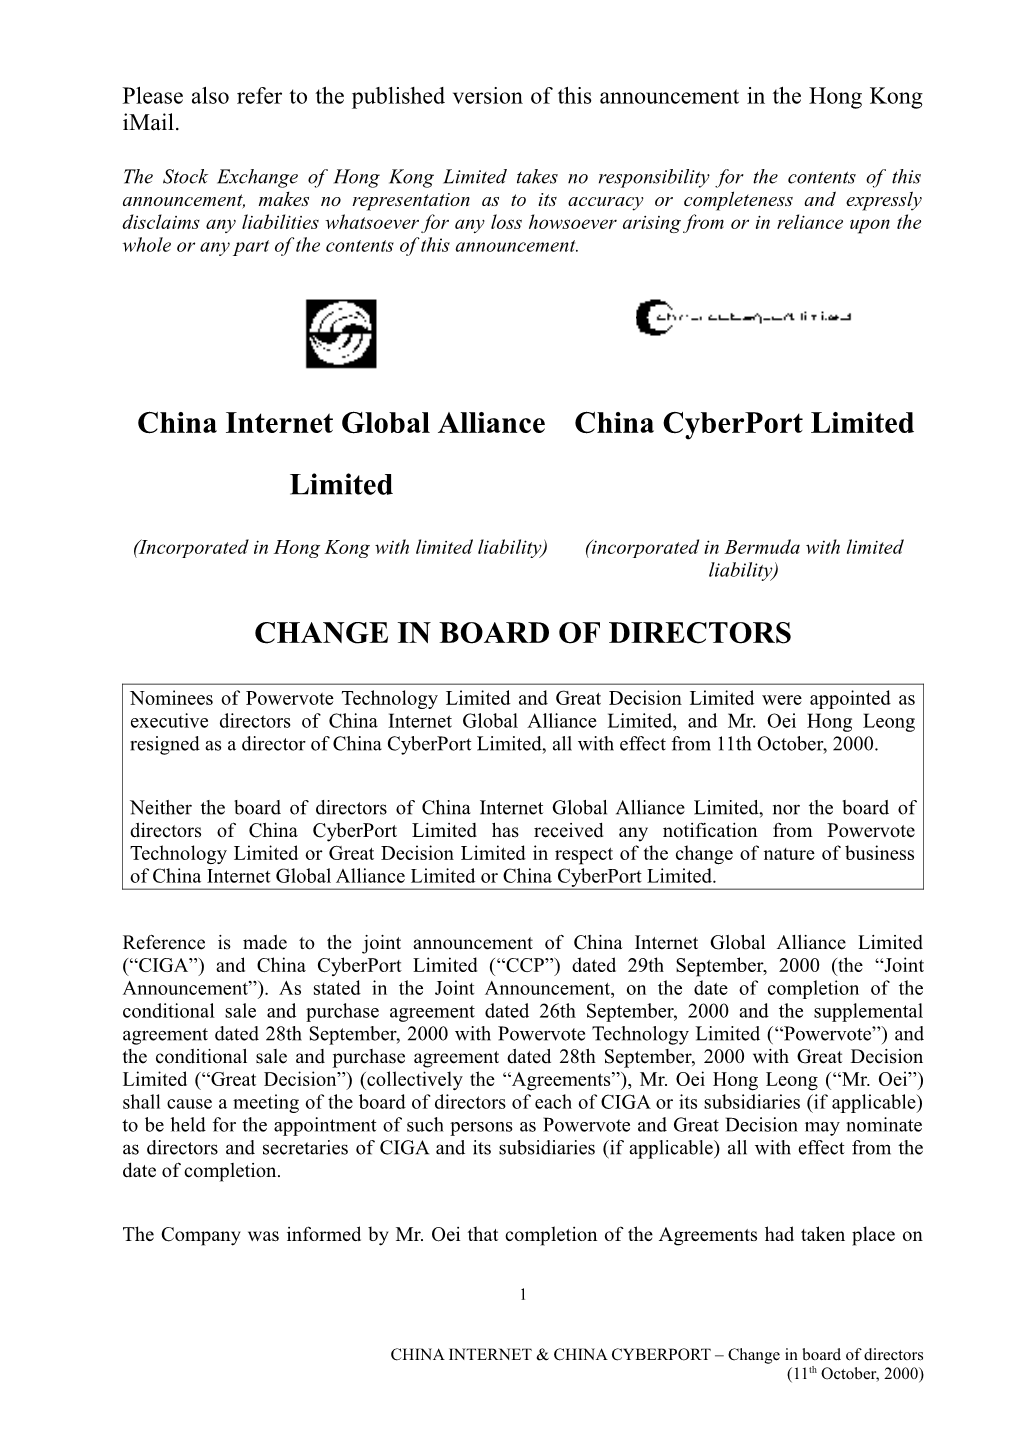 CHINA CYBERPORT 0149 & CHINA INTERNET 0235 - Joint Announcement